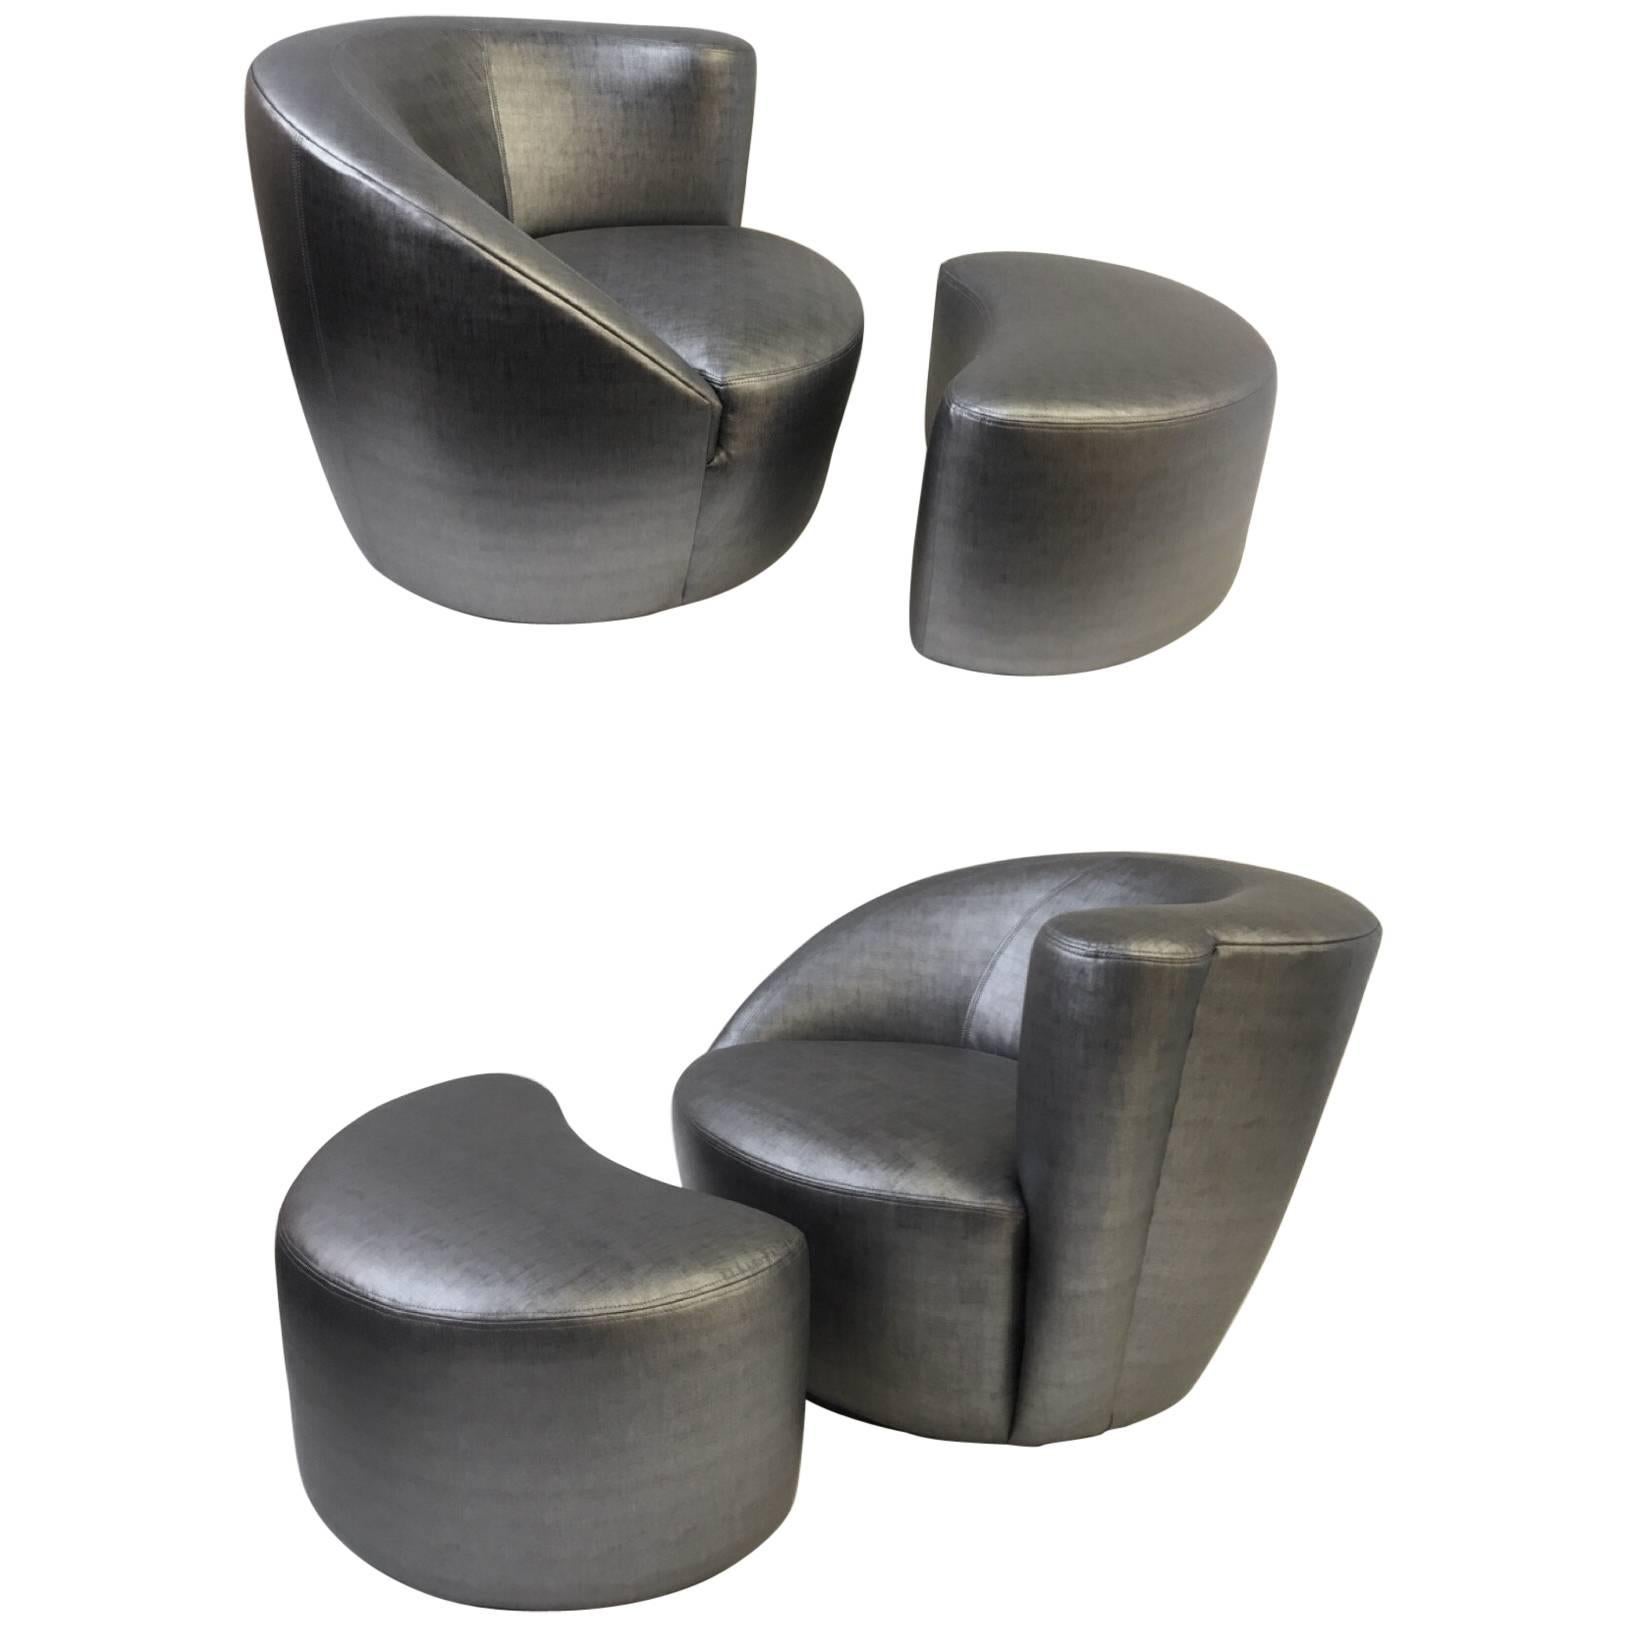 Pair of Swivel Lounge Chair and Ottoman by Vladimir Kagan for Directional